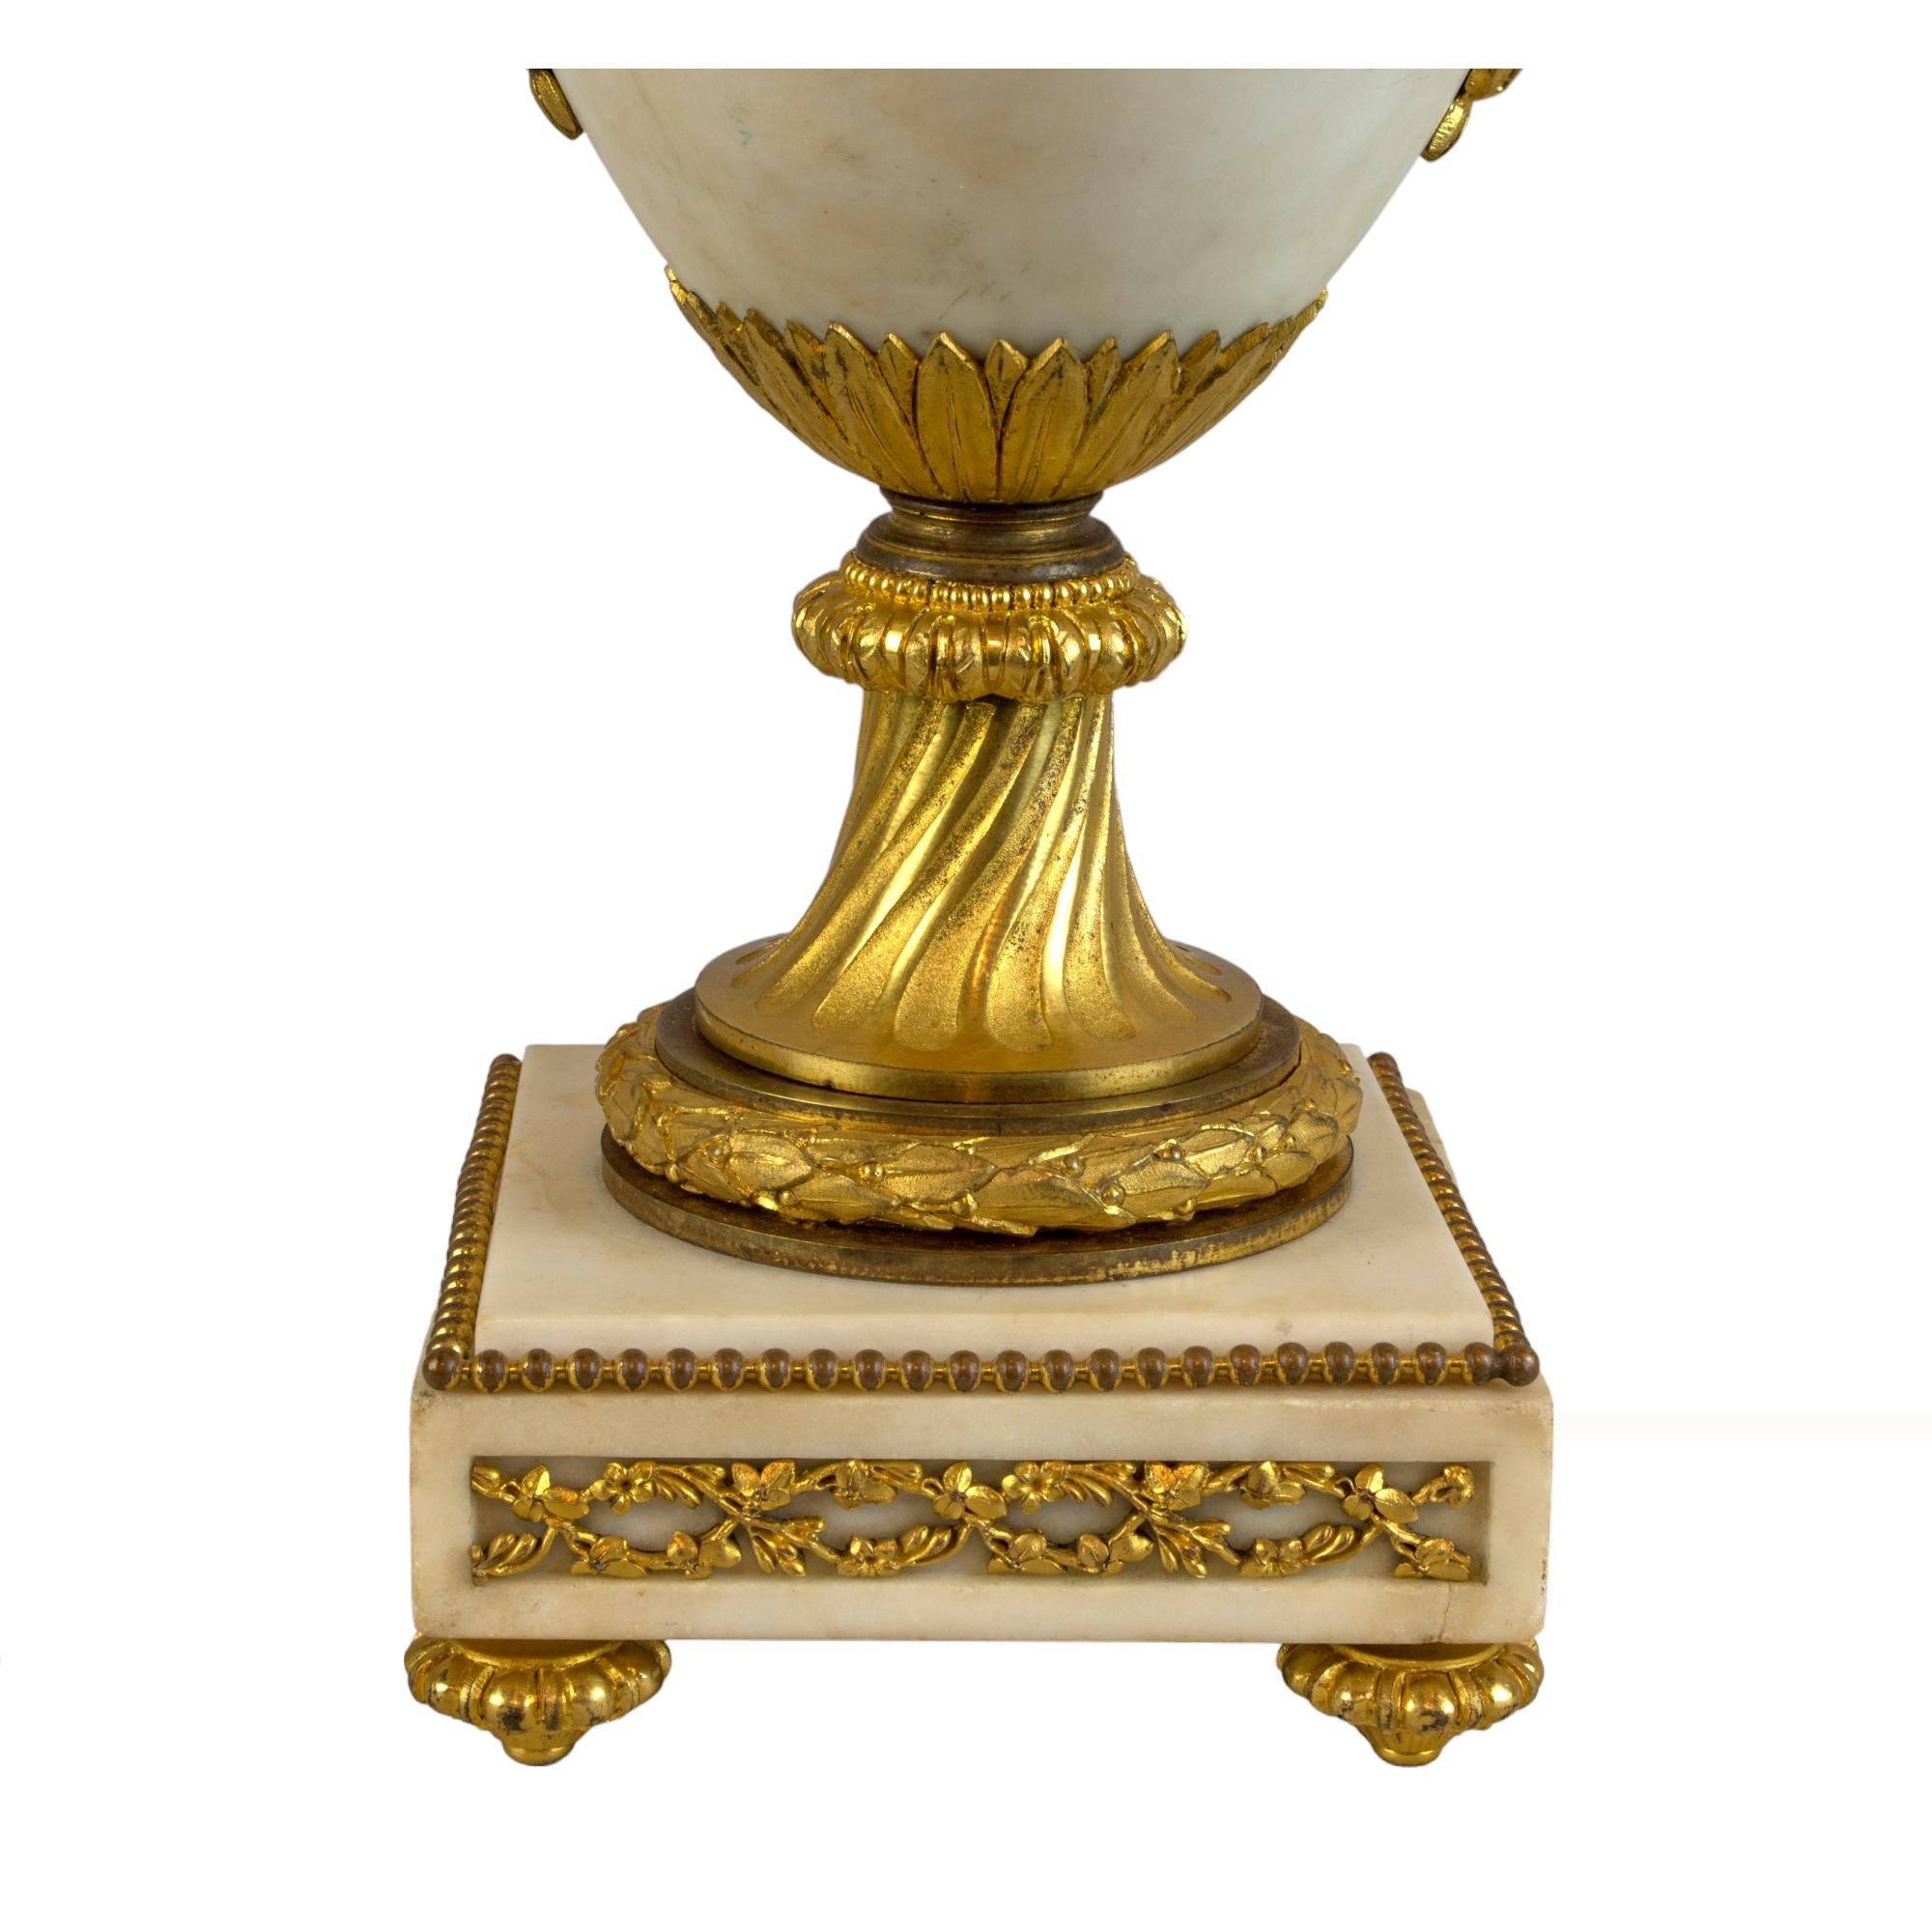 Magnificent Pair of Louis XVI Style Gilt-Bronze-Mounted White Marble Urns For Sale 3